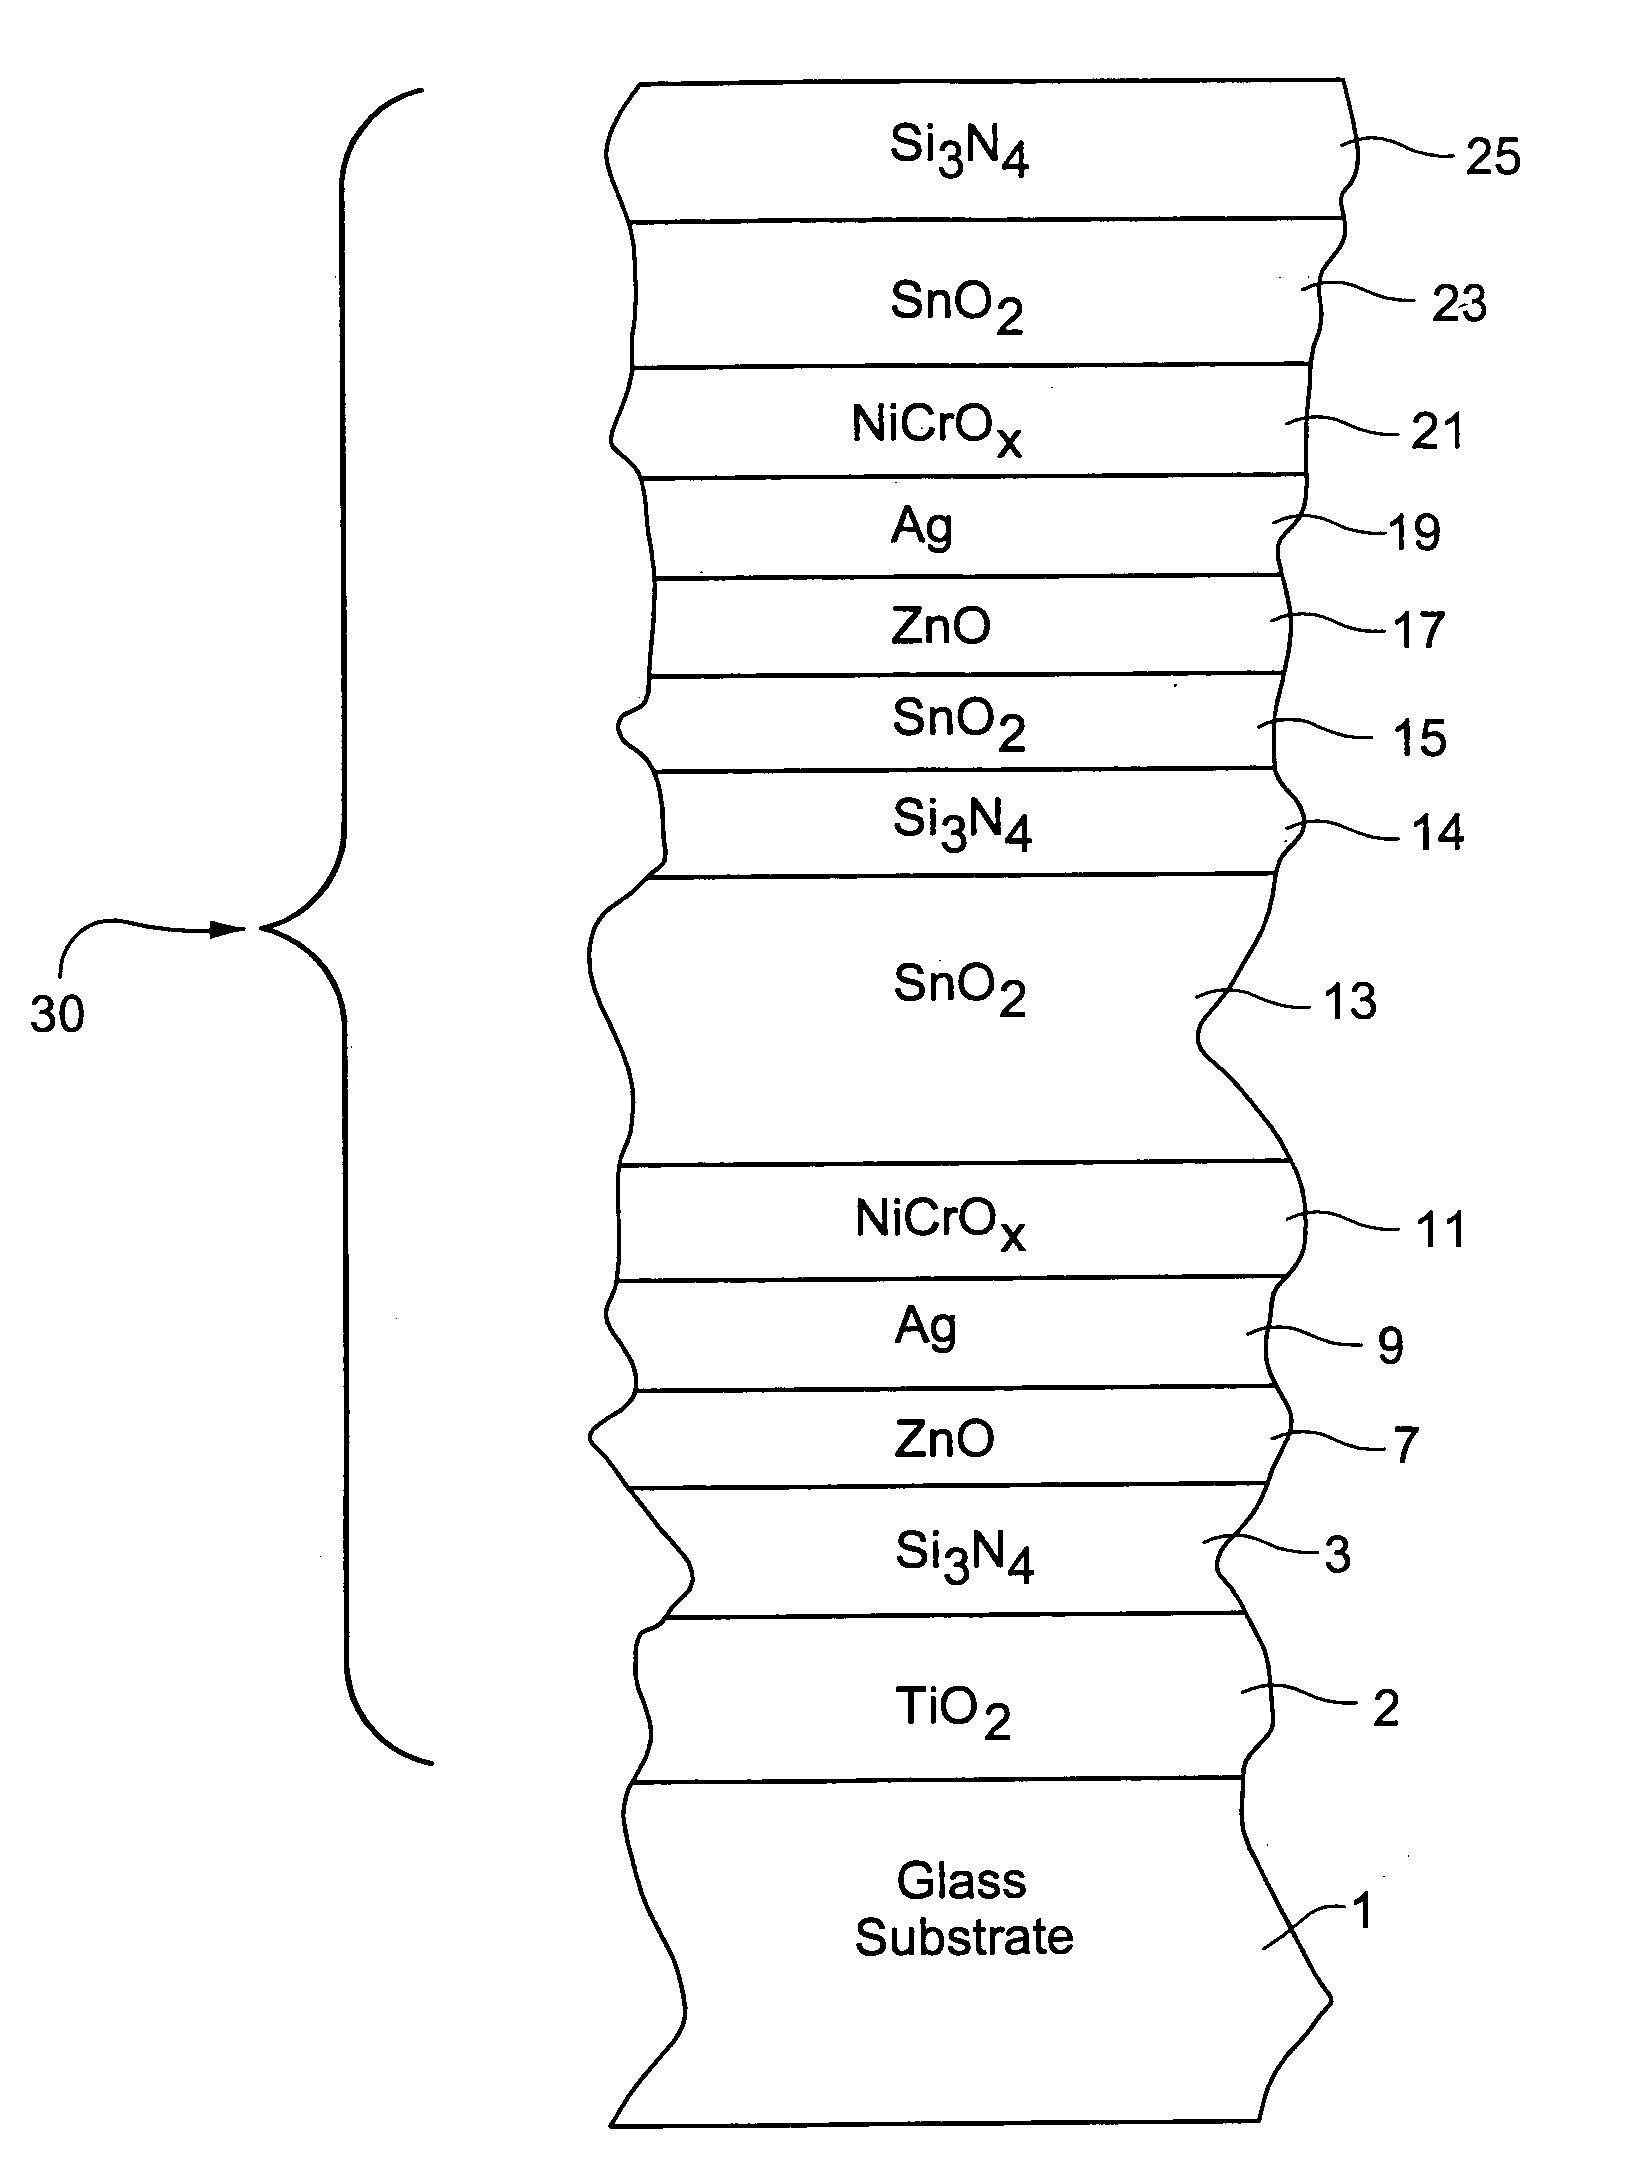 Coated article with low-E coating including tin oxide interlayer